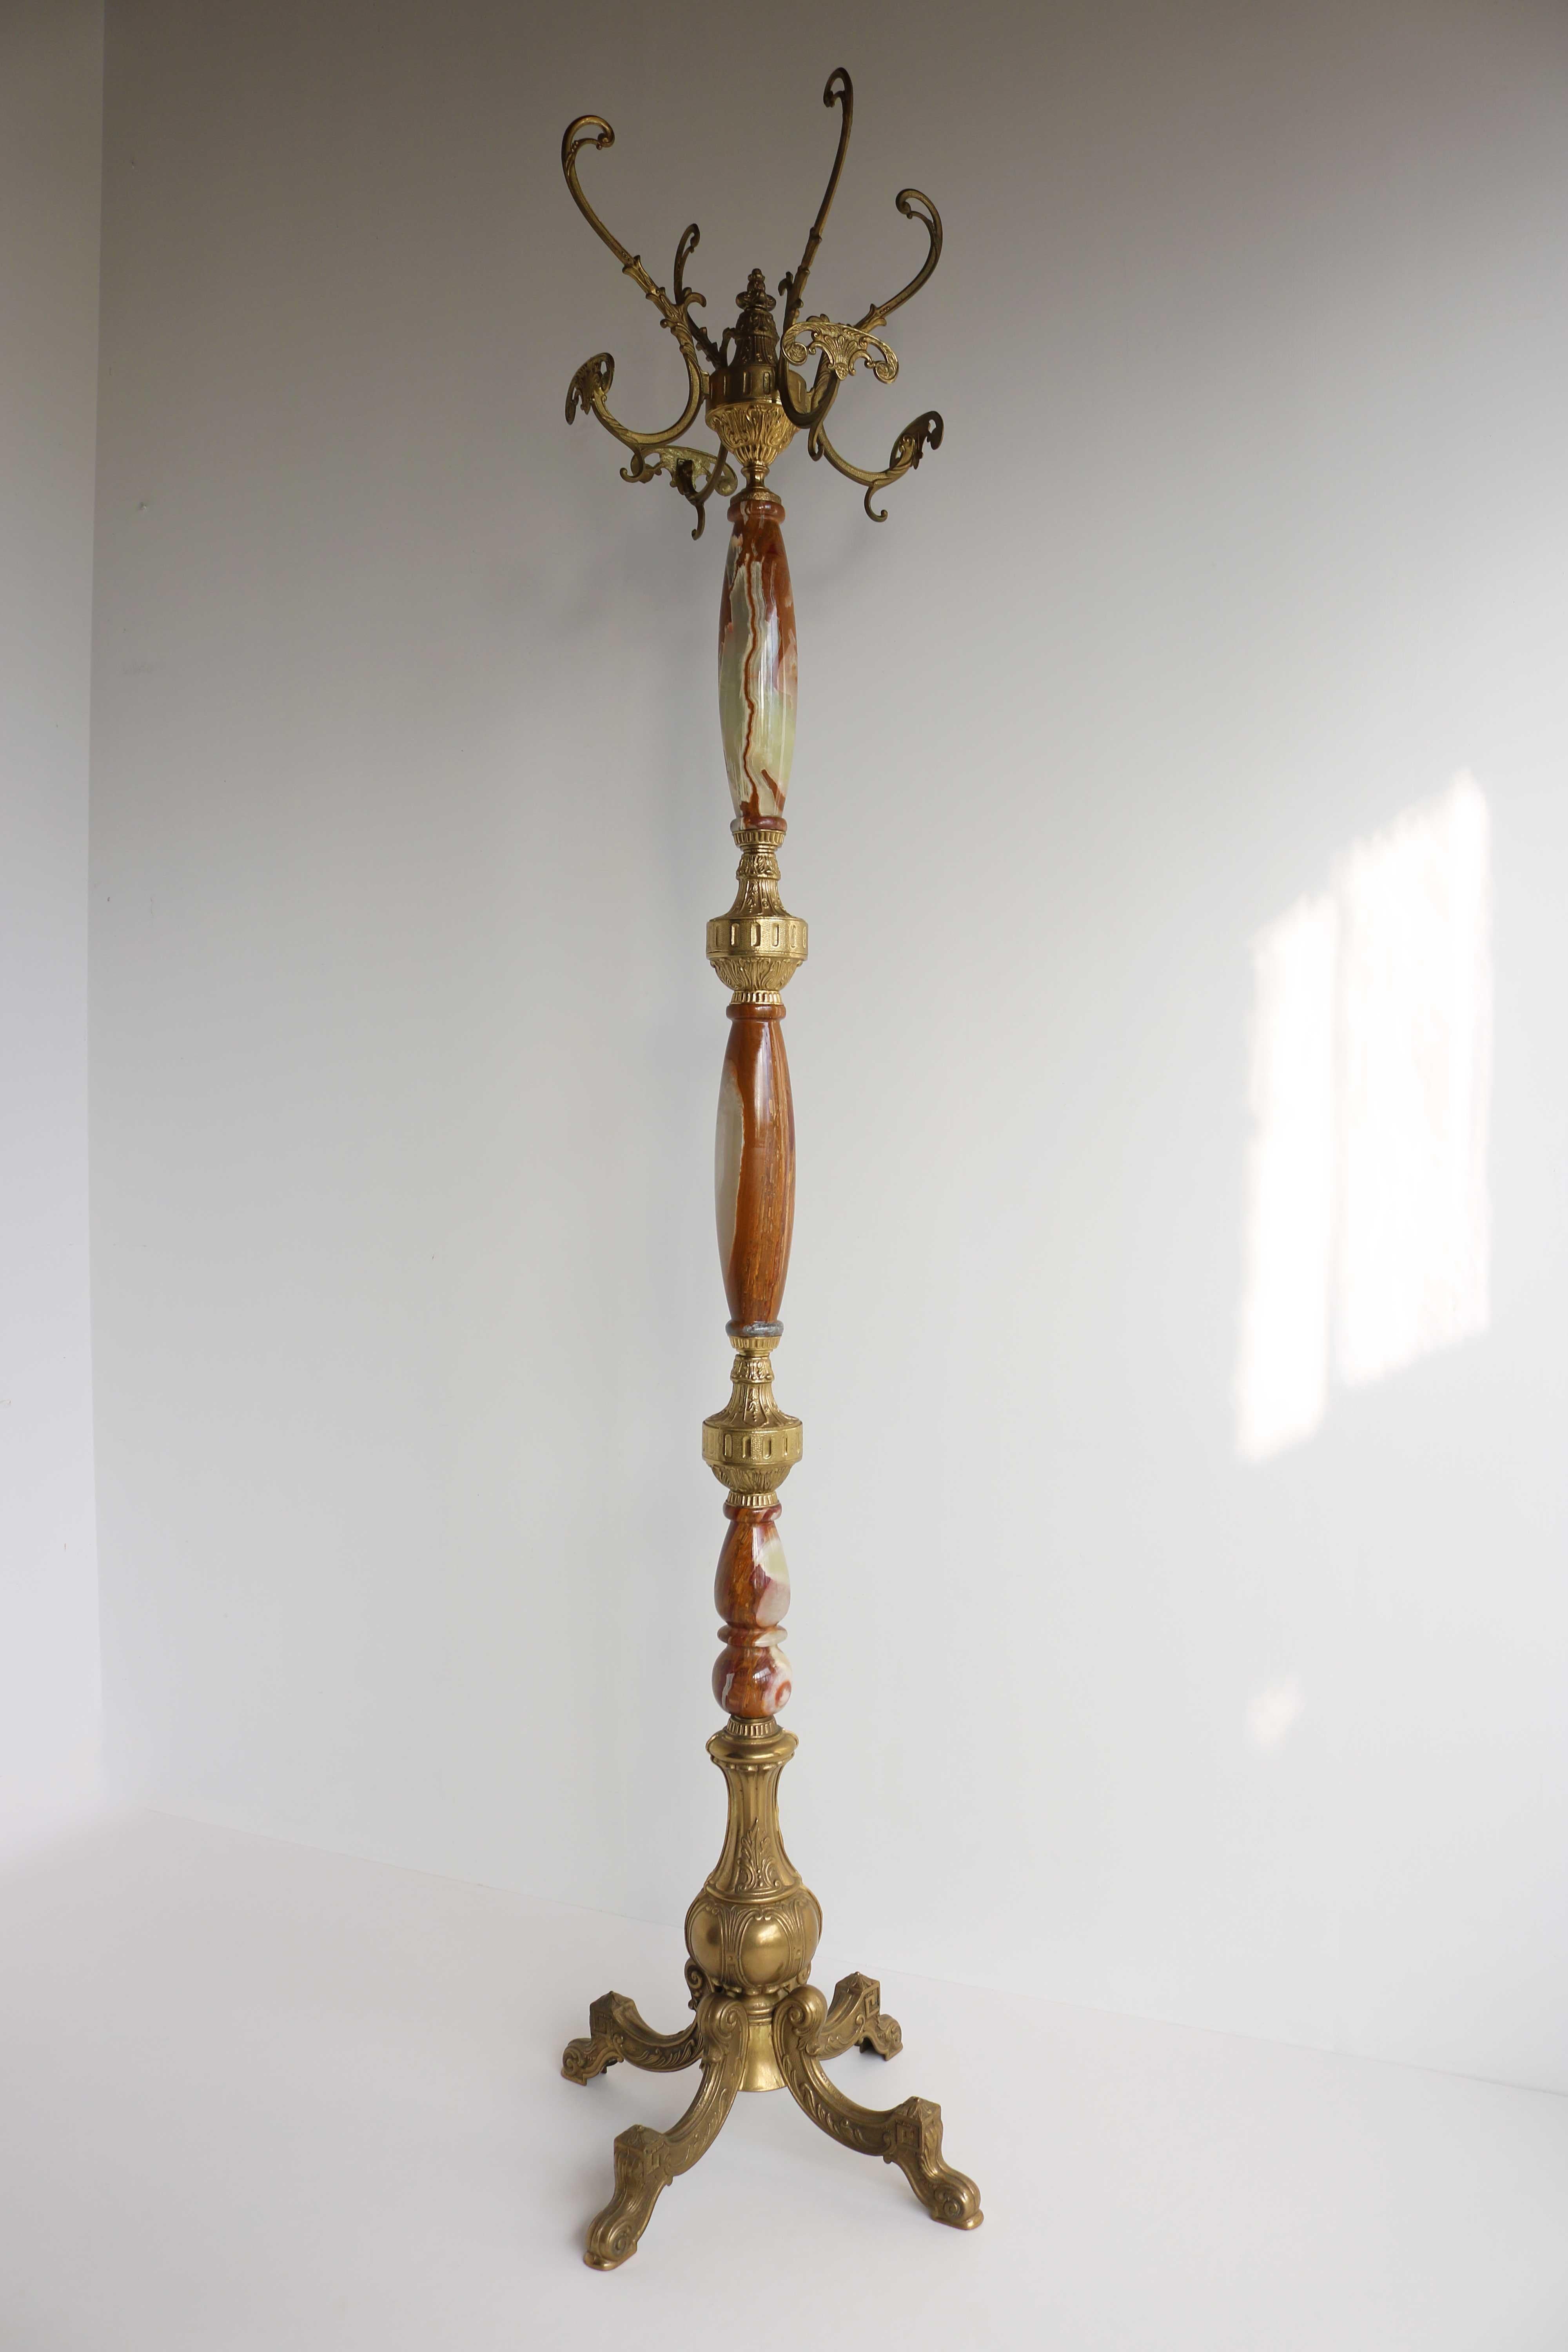 Italian Ornate Antique Brass & Onyx Brown Marble Coat Hat Rack Hall Tree, 1950s For Sale 1